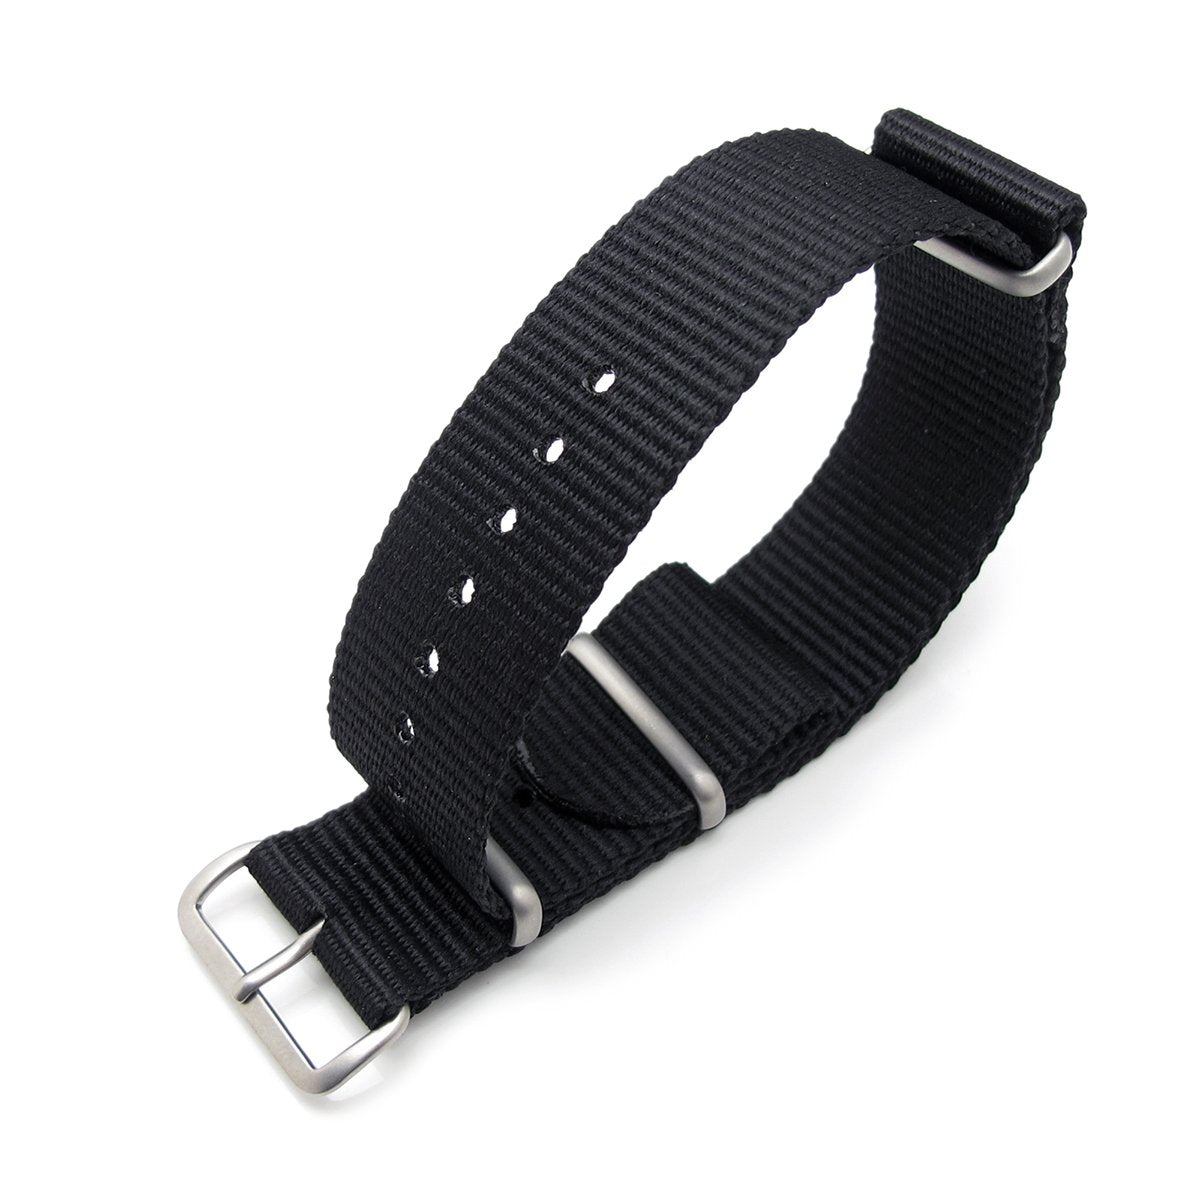 MiLTAT 18mm or 24mm G10 military watch strap ballistic nylon armband, Brushed - Black Strapcode Watch Bands